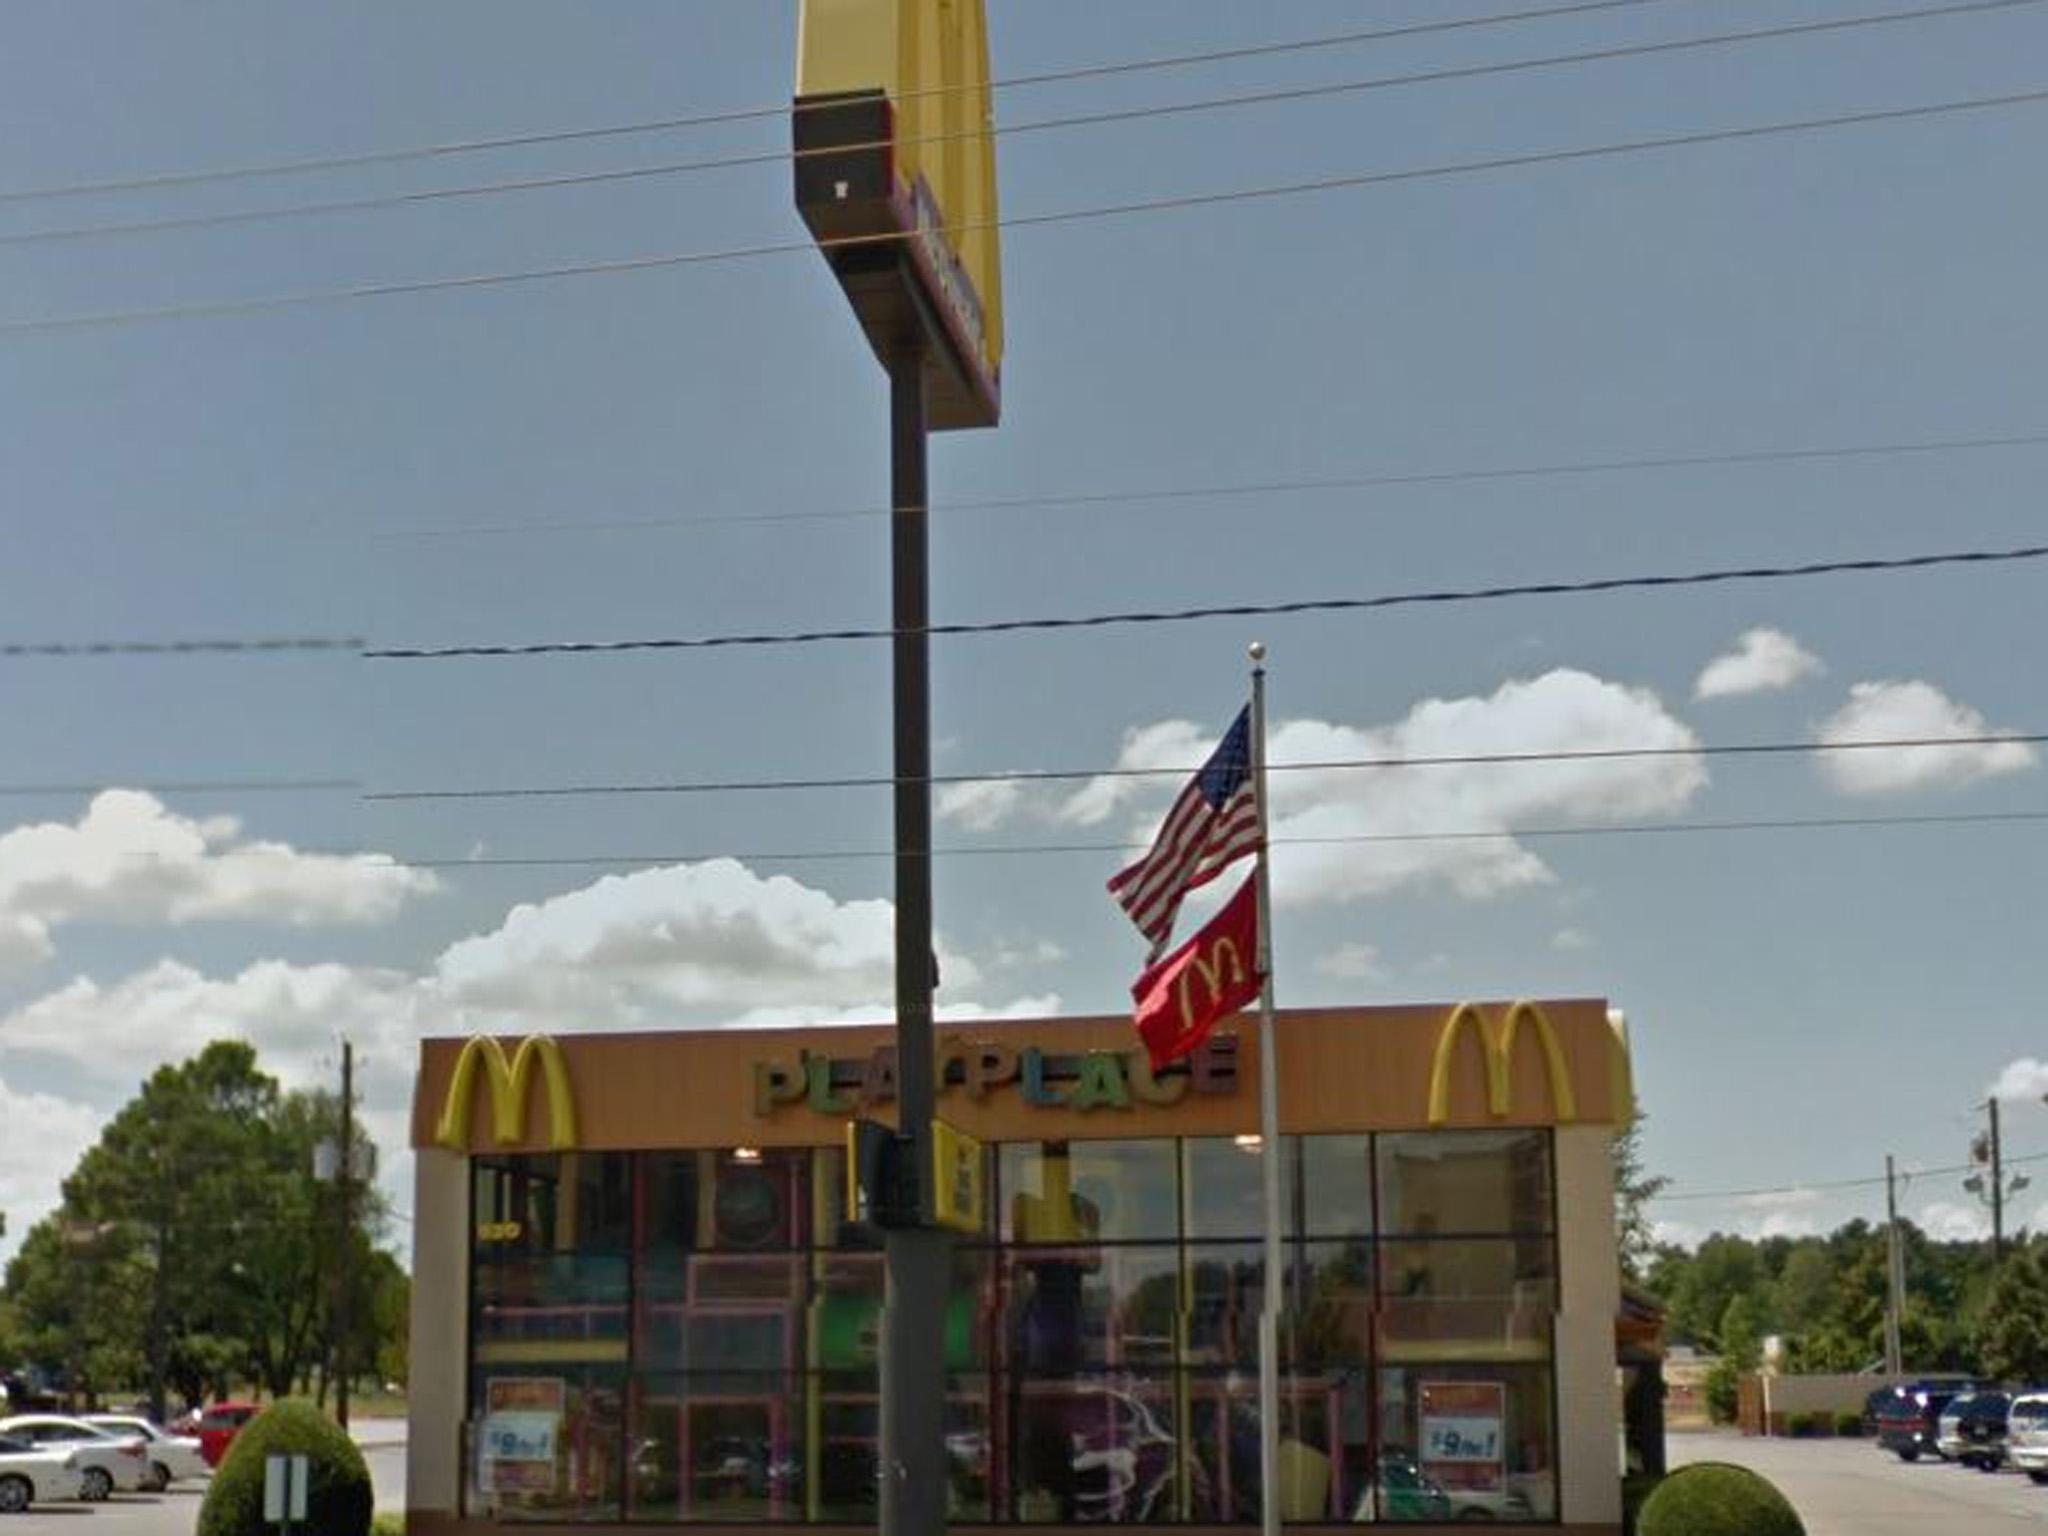 The incident happened at a McDonald's in Springdale in Arkansas